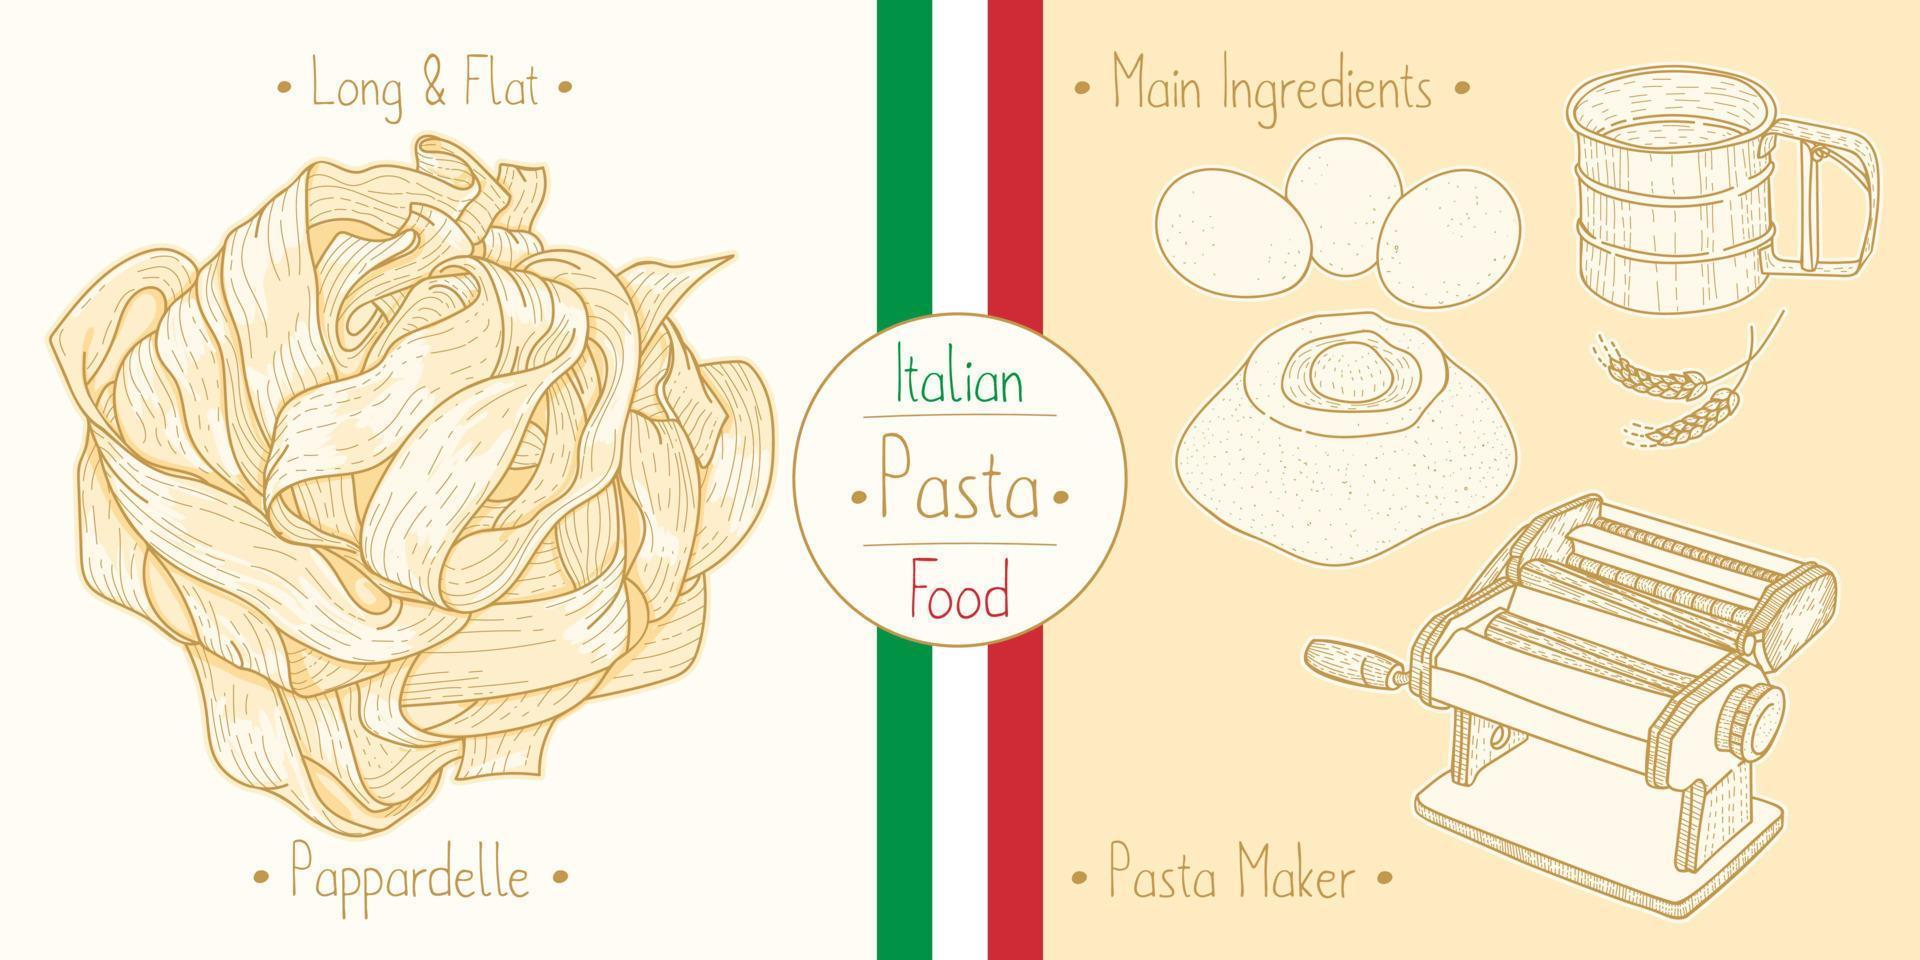 Cooking italian food Pappardelle Pasta and main ingredients and pasta makers equipment, sketching illustration in vintage style vector